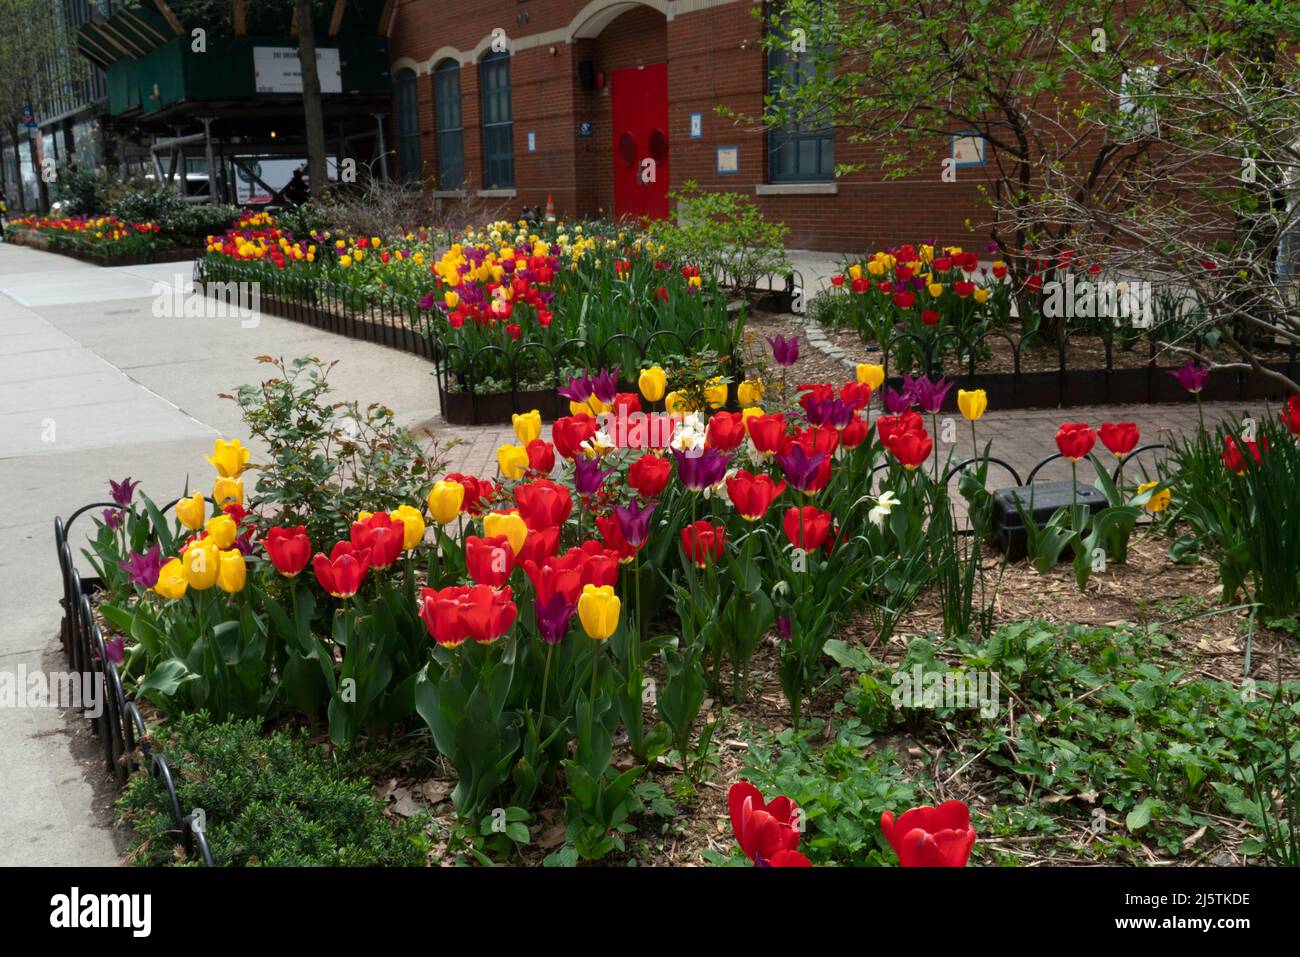 In late April, brilliantly colored tulips bloom in front of an elementary school in Tribeca, a neighborhood in Lower Manhattan, New York City. Stock Photo